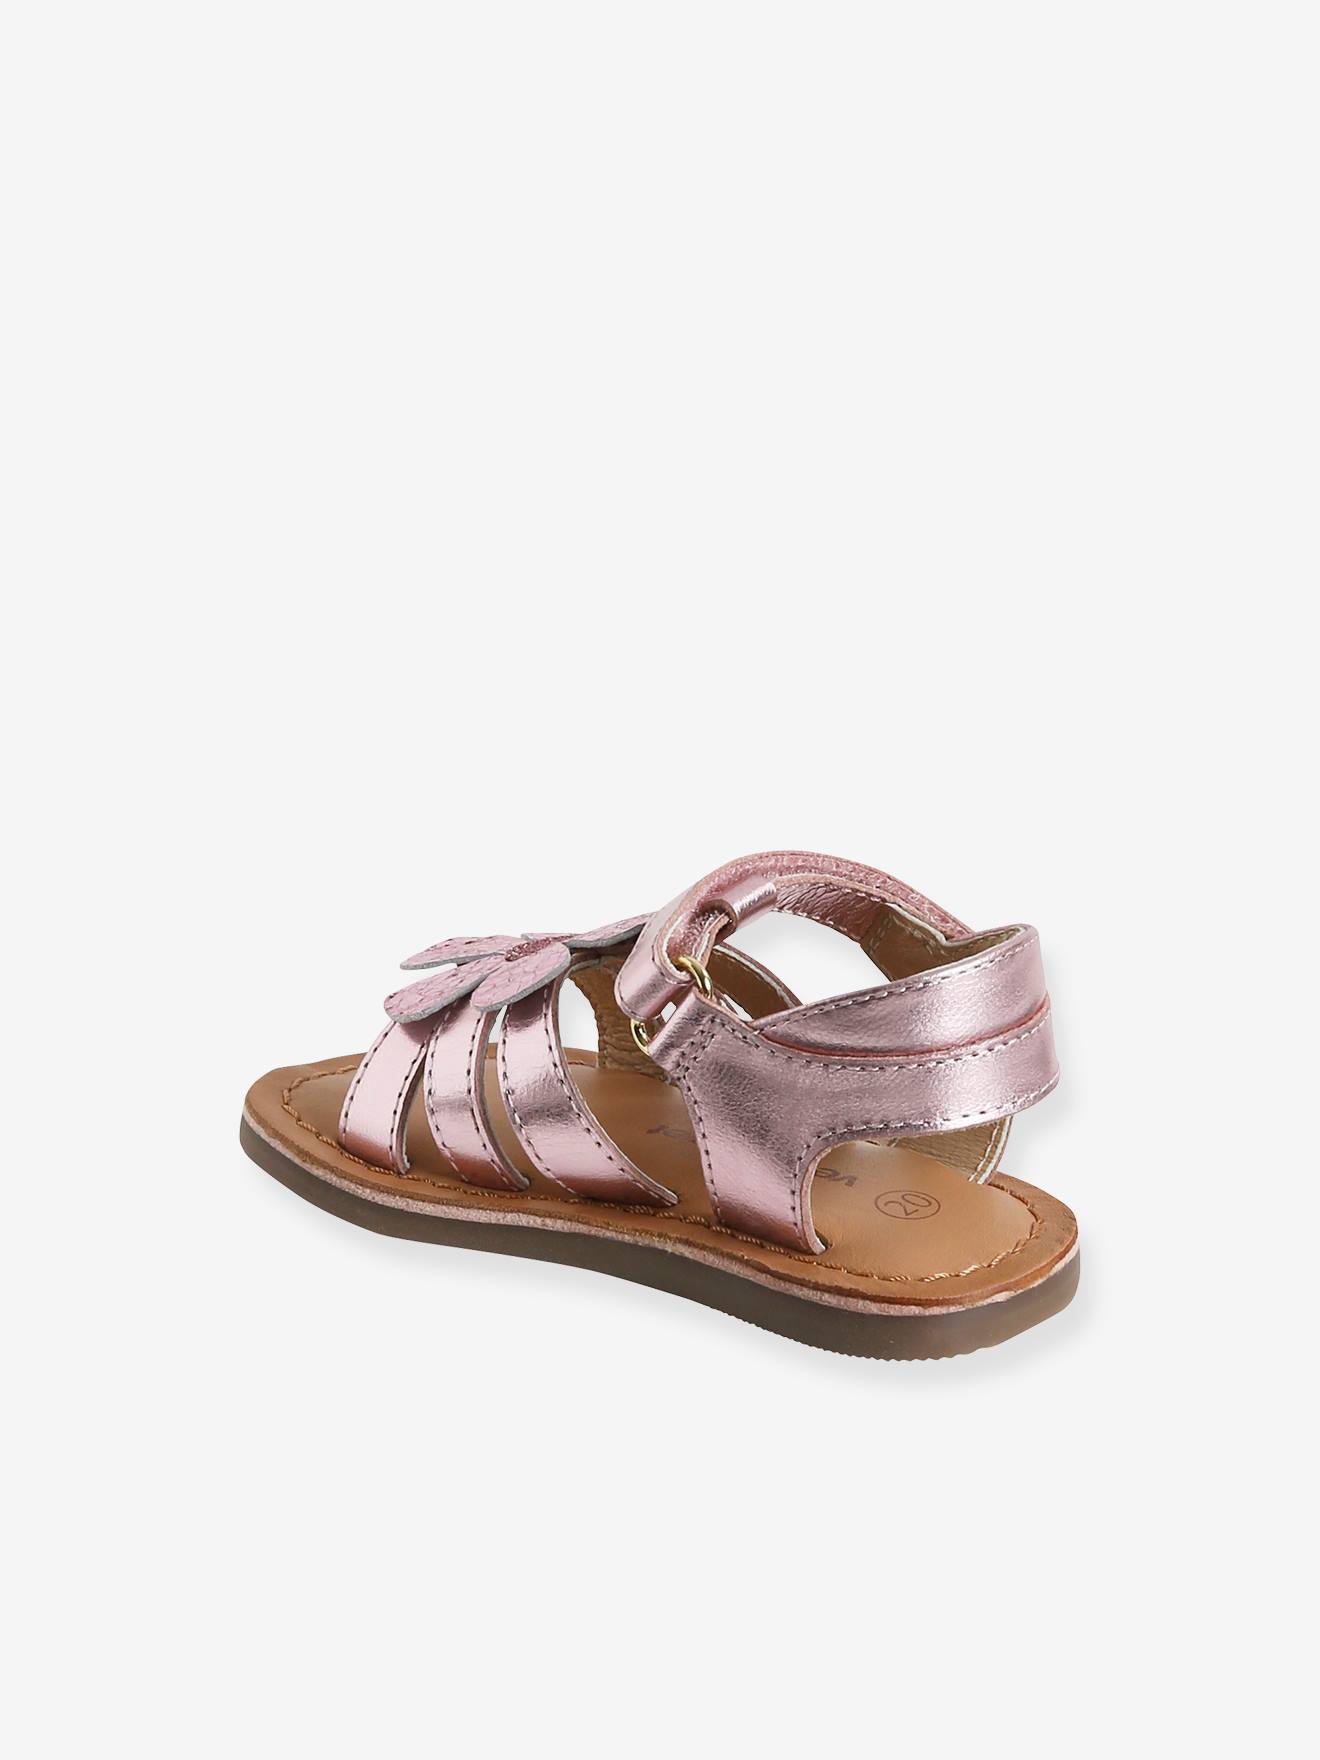 Baby/Toddler/Infant Girl Leather Closed Toe Sandals FIRST STEPS - HIBISCUS  FLOWER (with ankle support)